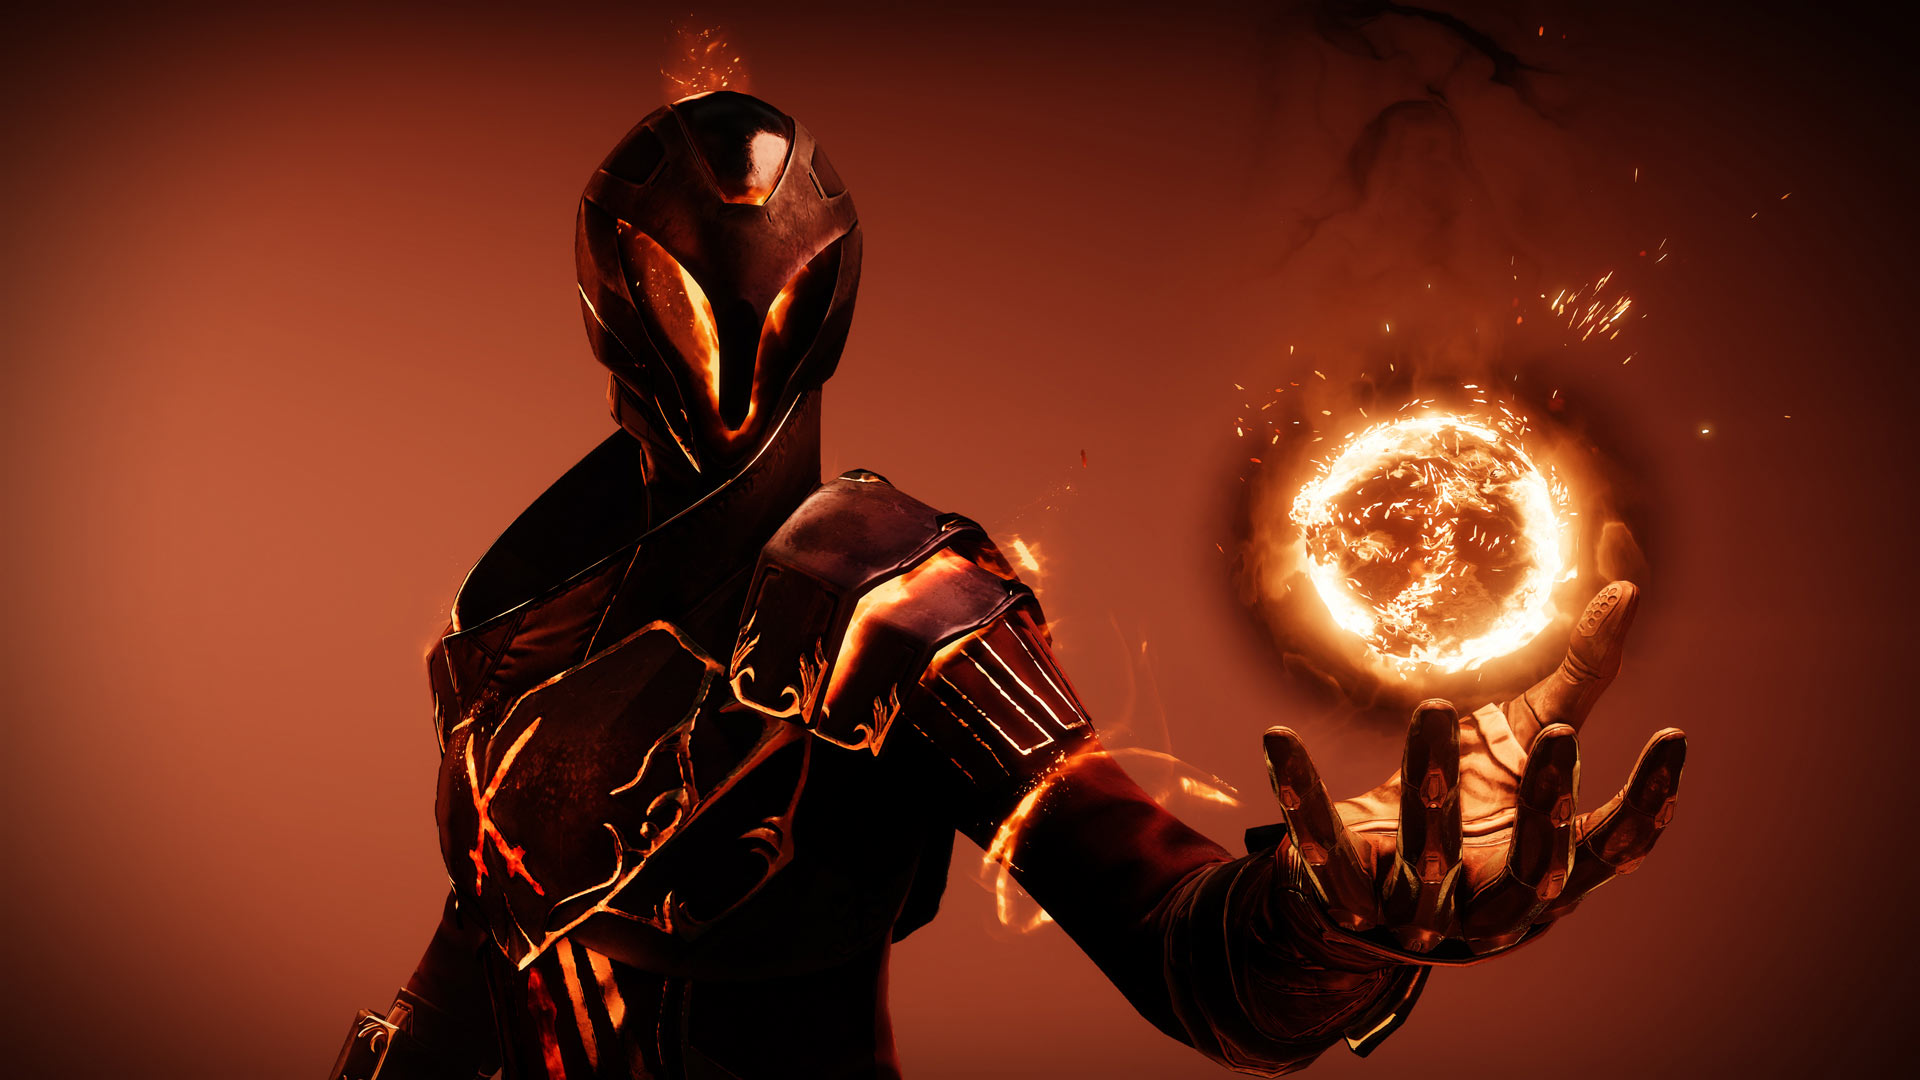 Destiny 2 classes: the Solar Warlock subclass holding an orb of burning energy